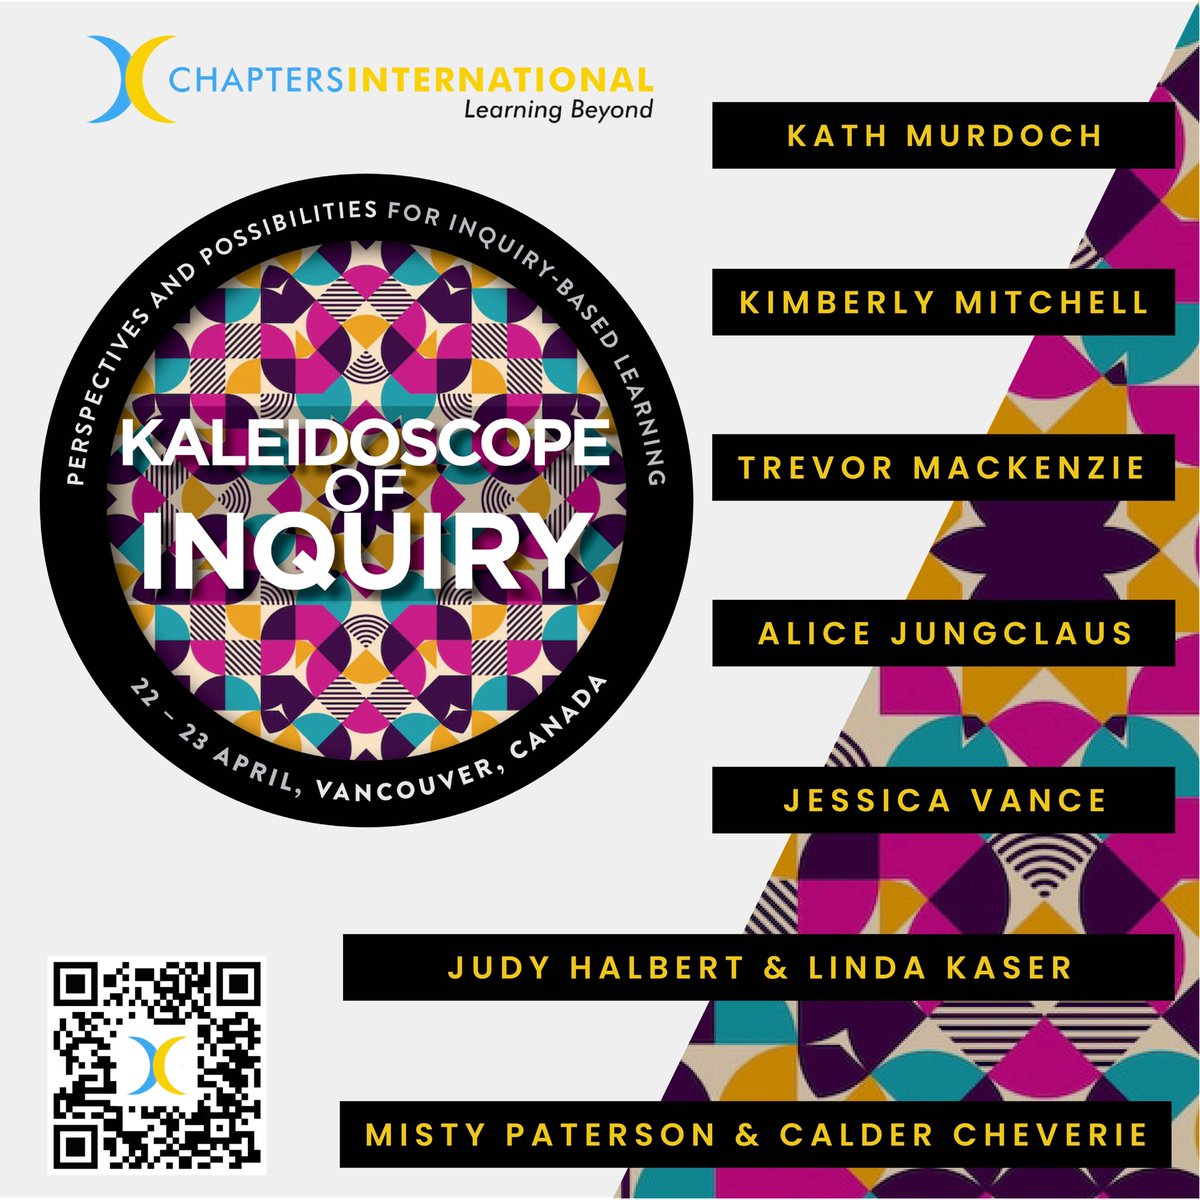 #bcedchat friends, this is a special one!

This April @ChaptersInt is hosting some dear #inquiry friends for an event like no other. Join @kjinquiry @inquiryfive @kaser_linda @jhalbert8 @jess_vanceEDU @PatersonMisty @AliceJungclaus Calder Cheverie

Info: chaptersinternational.com/conference.php